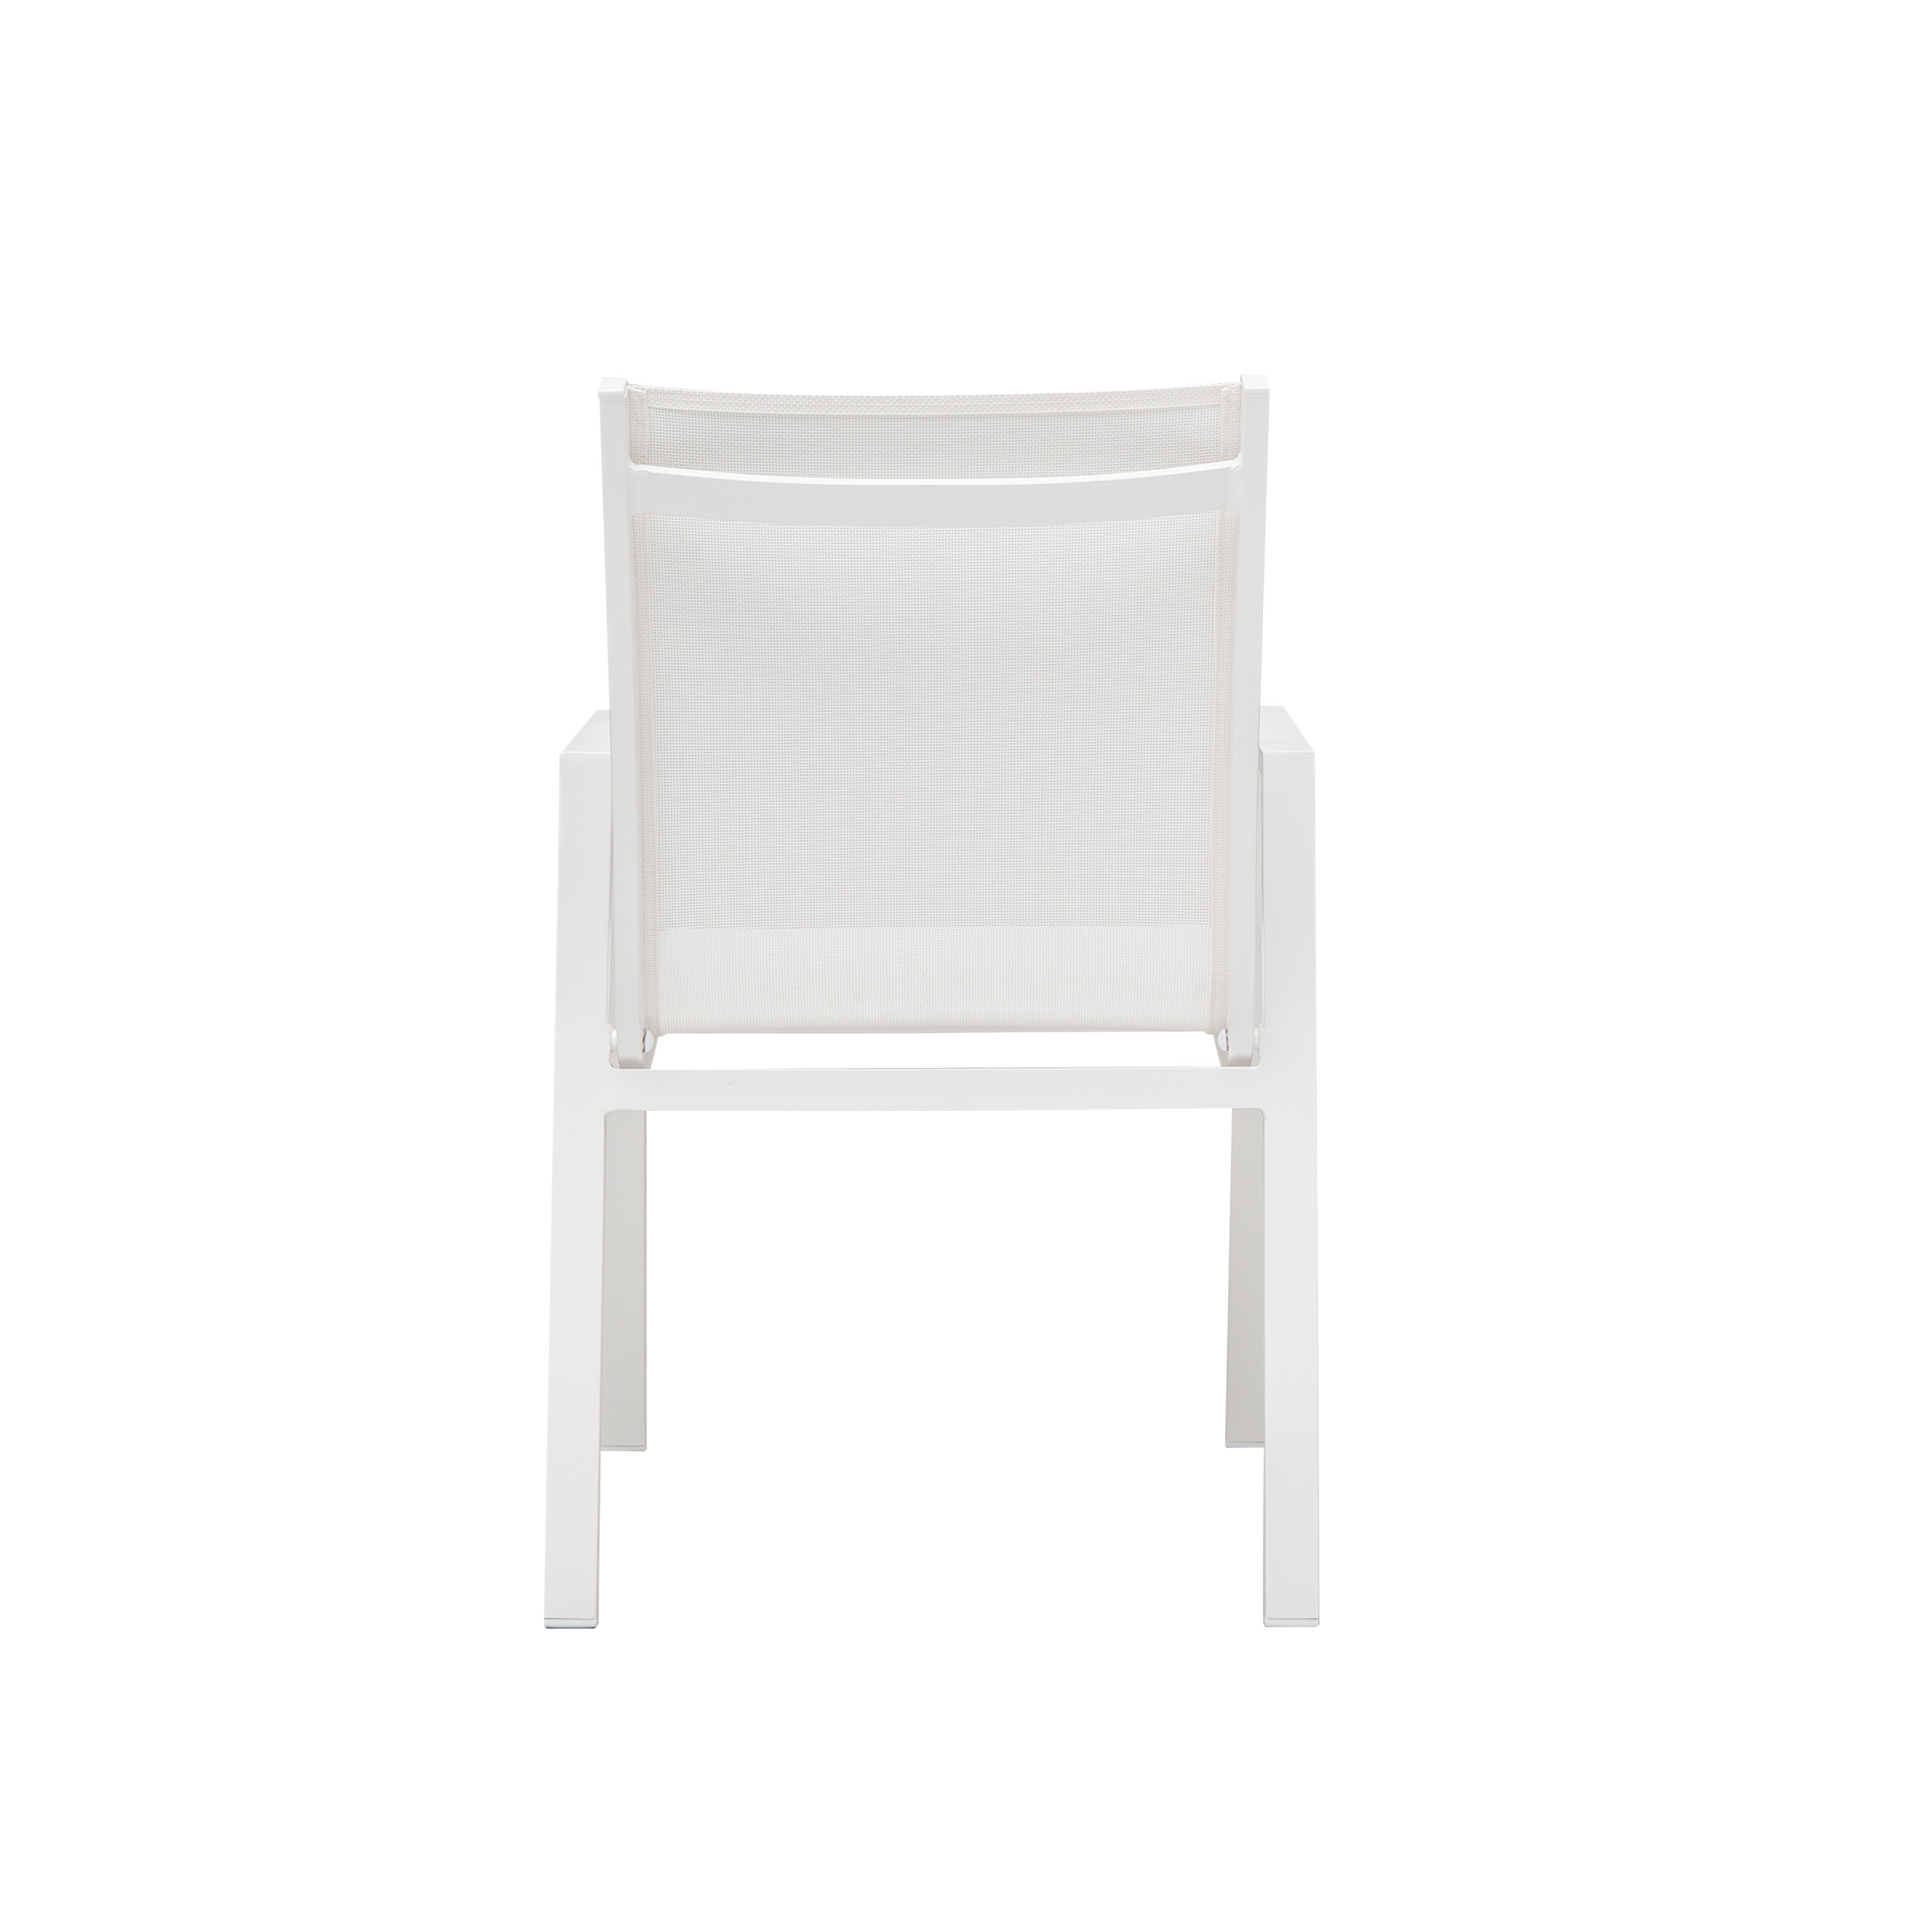 Snow white textile dining chair S2